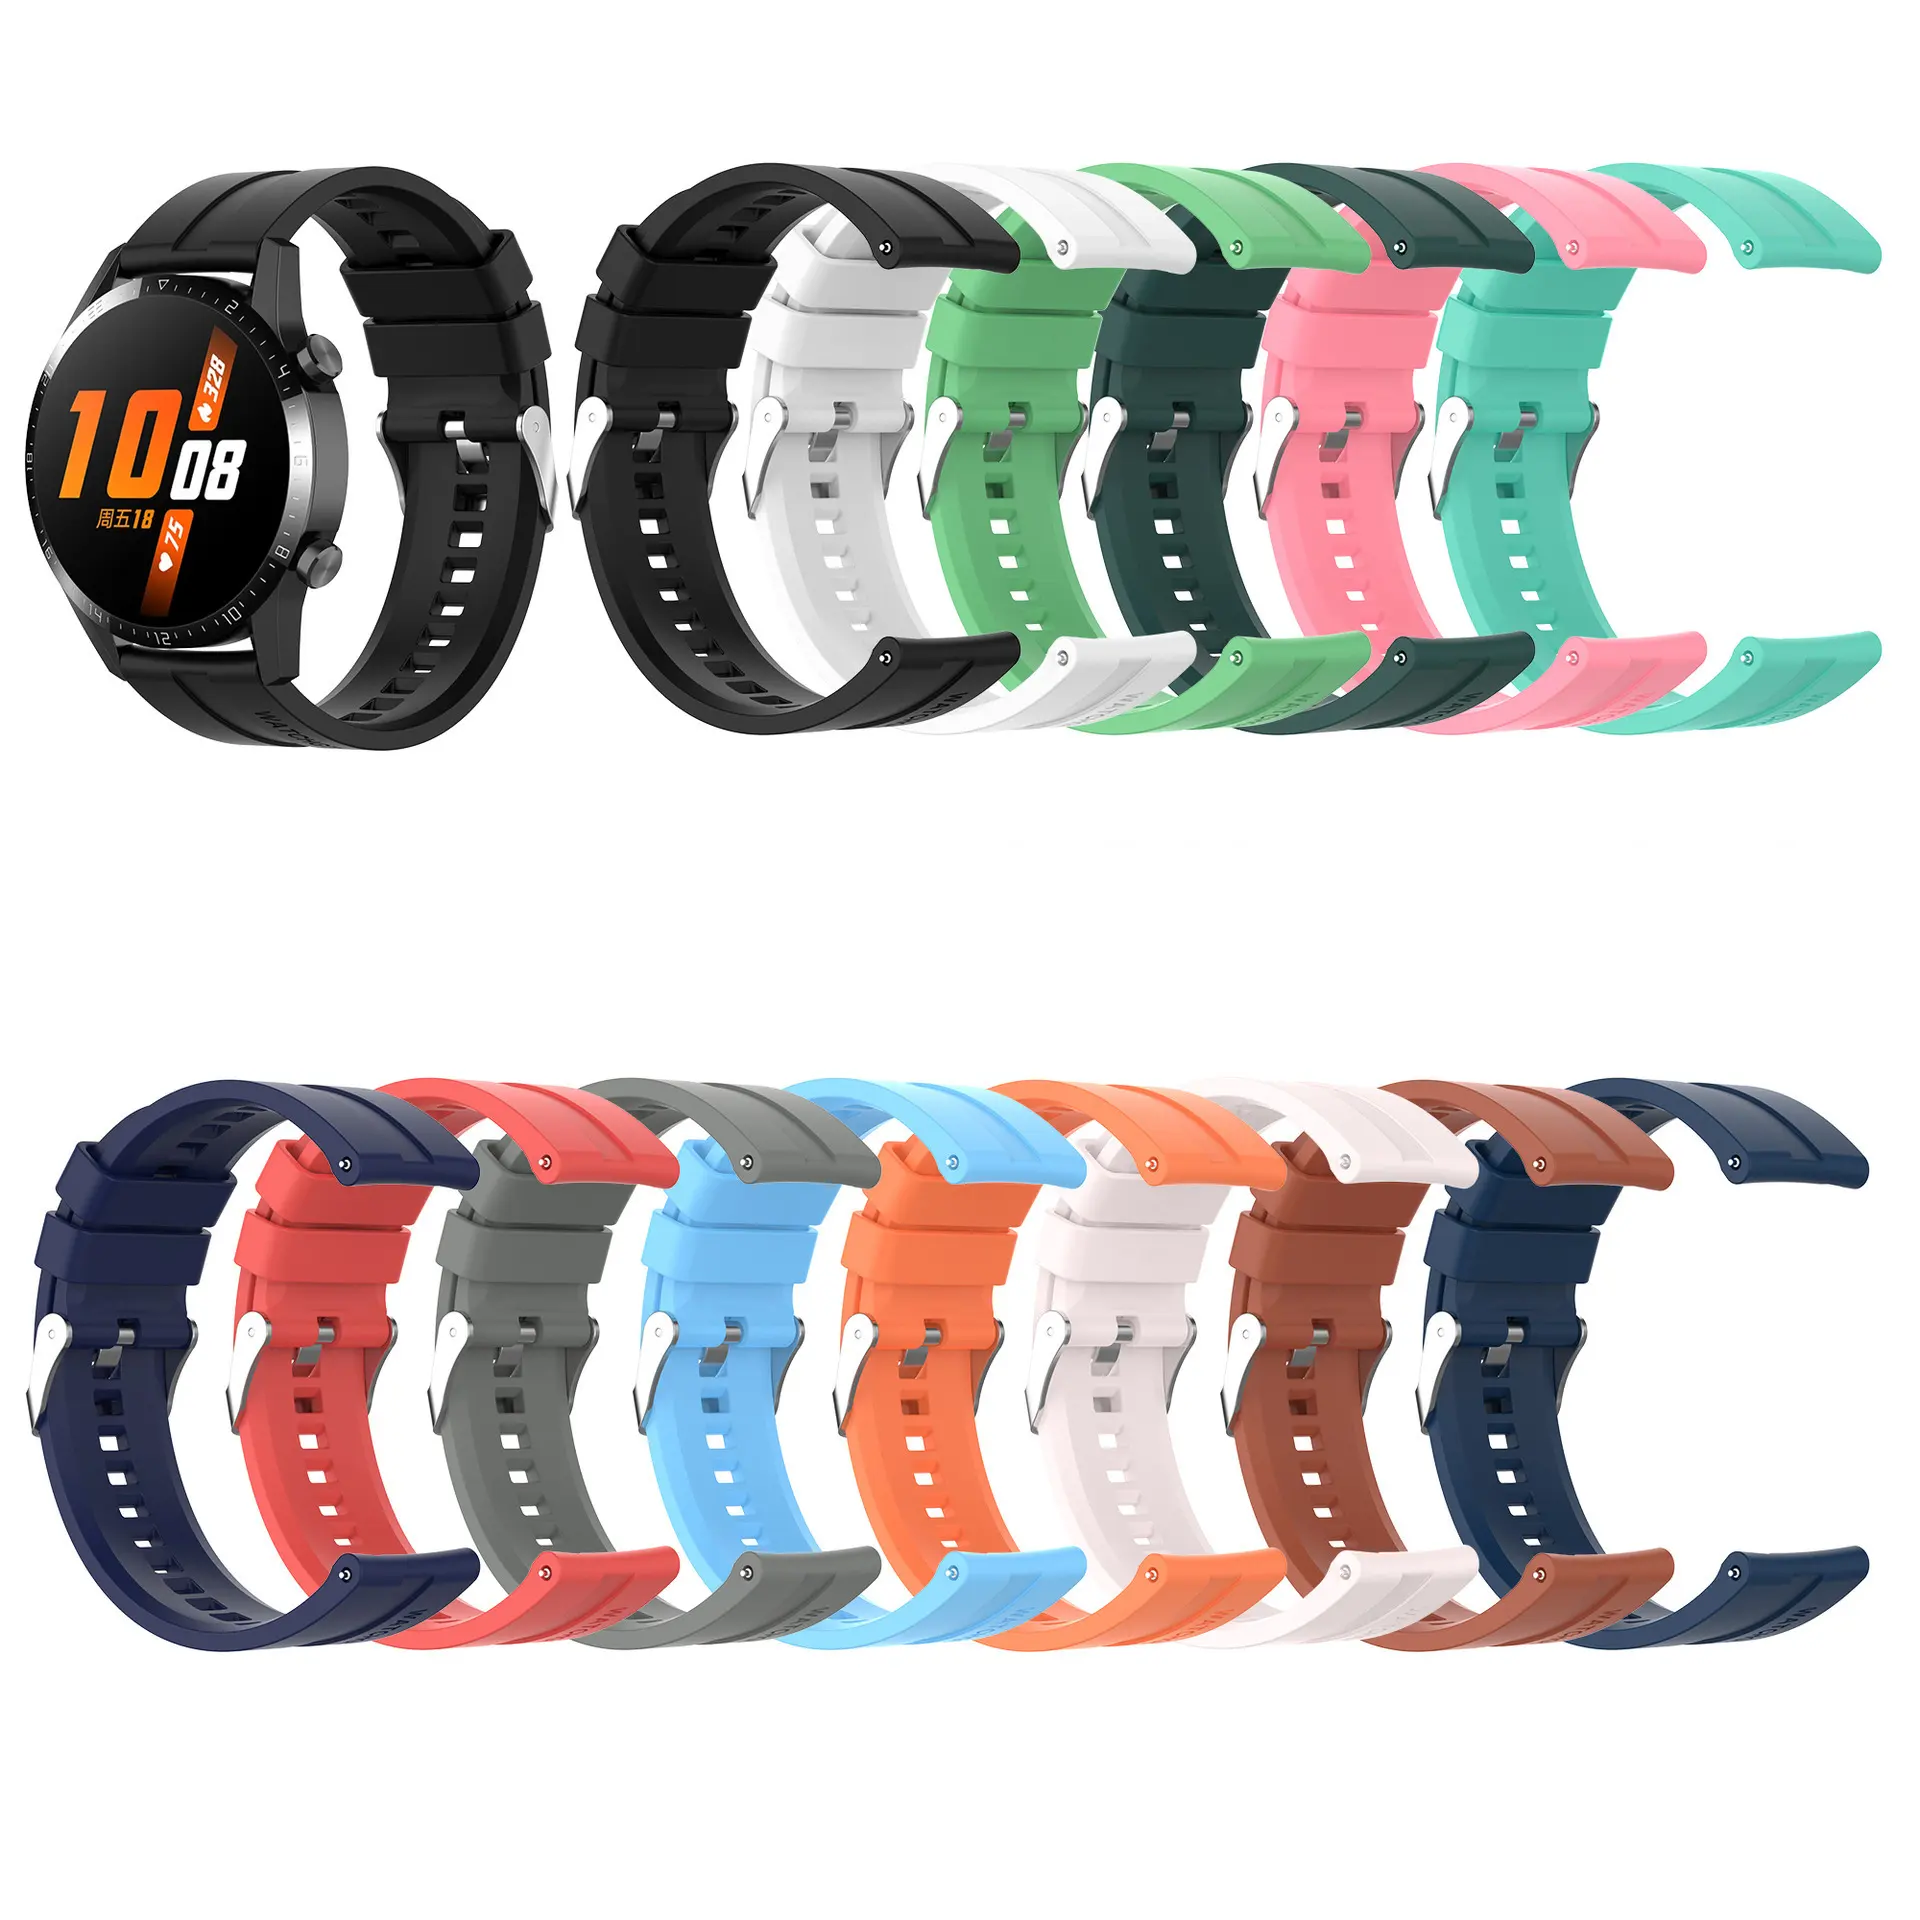 Sport silicone watch strap Universal 20mm smart watch bands for Amazfit GTS BIP for Haylou LS02 for Mibro amazfit watch bands